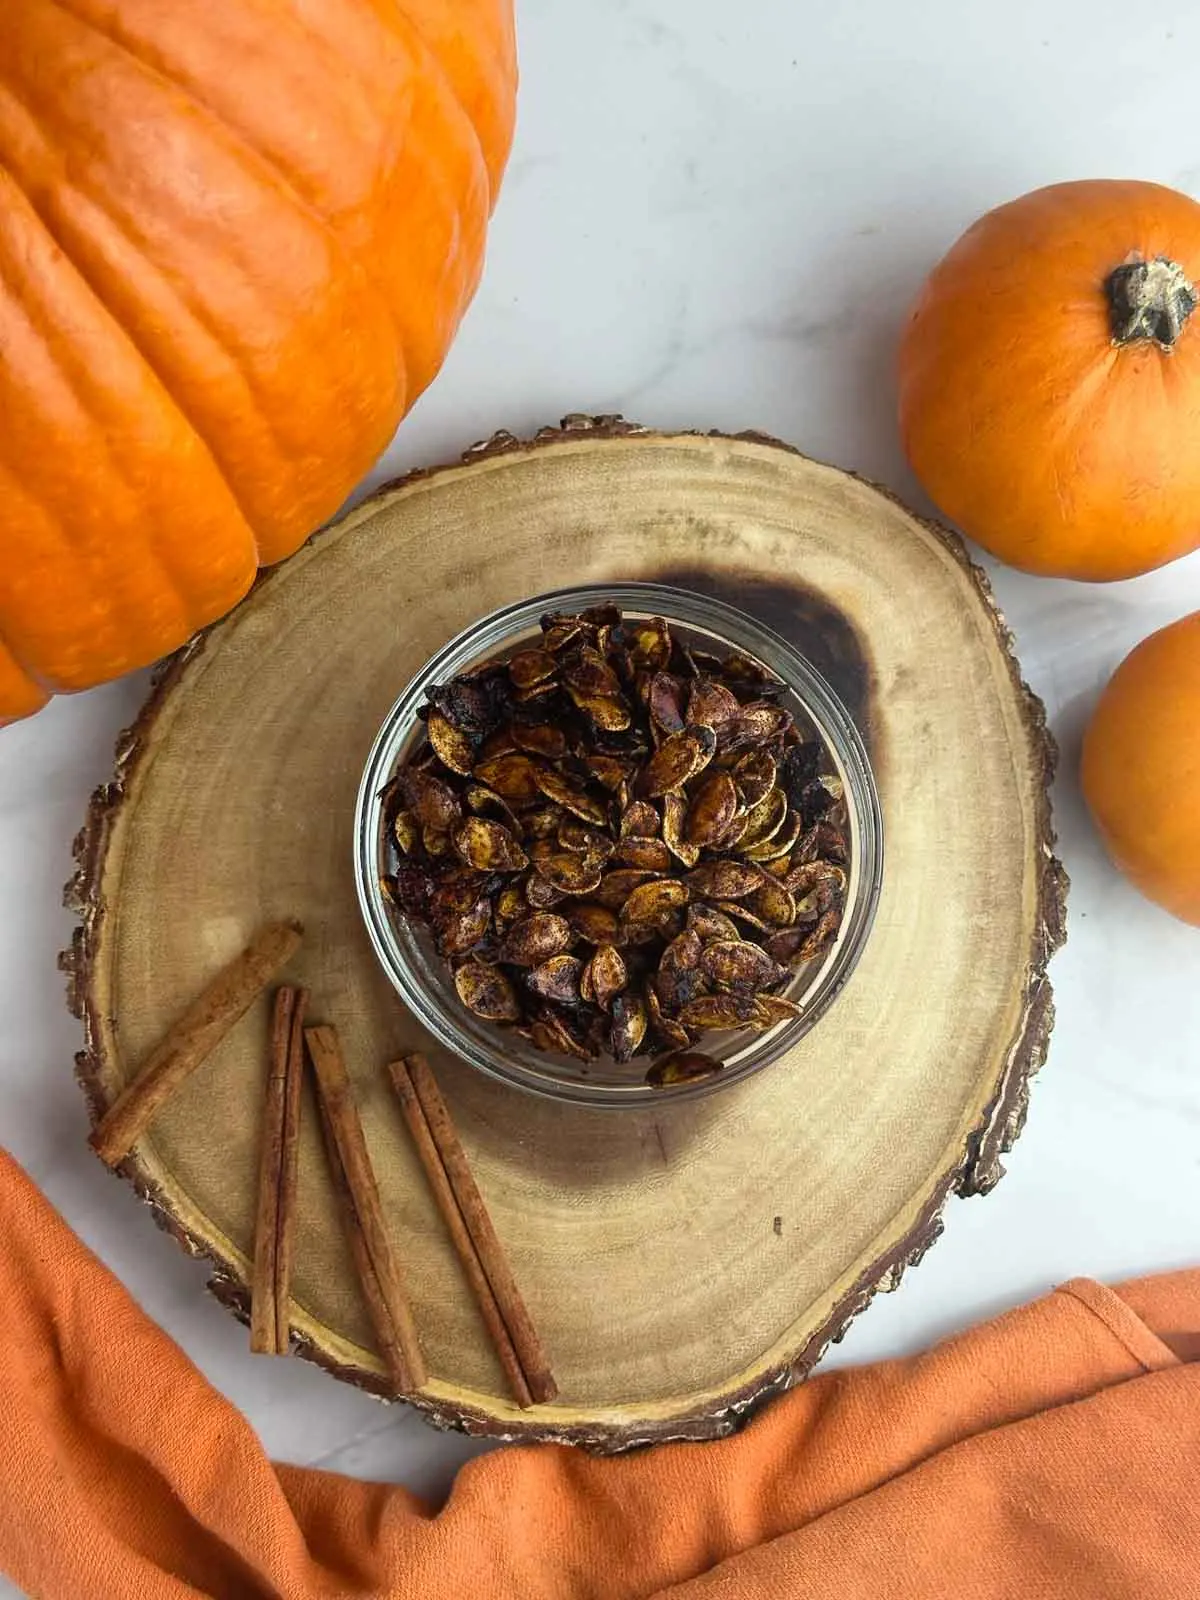 Honey roasted pumpkin seeds are an easy way to make use of the seeds from your Halloween pumpkin. Pumpkin seeds get tossed with olive oil, sweet honey, cinnamon, and sea salt for a yummy snack or topping!